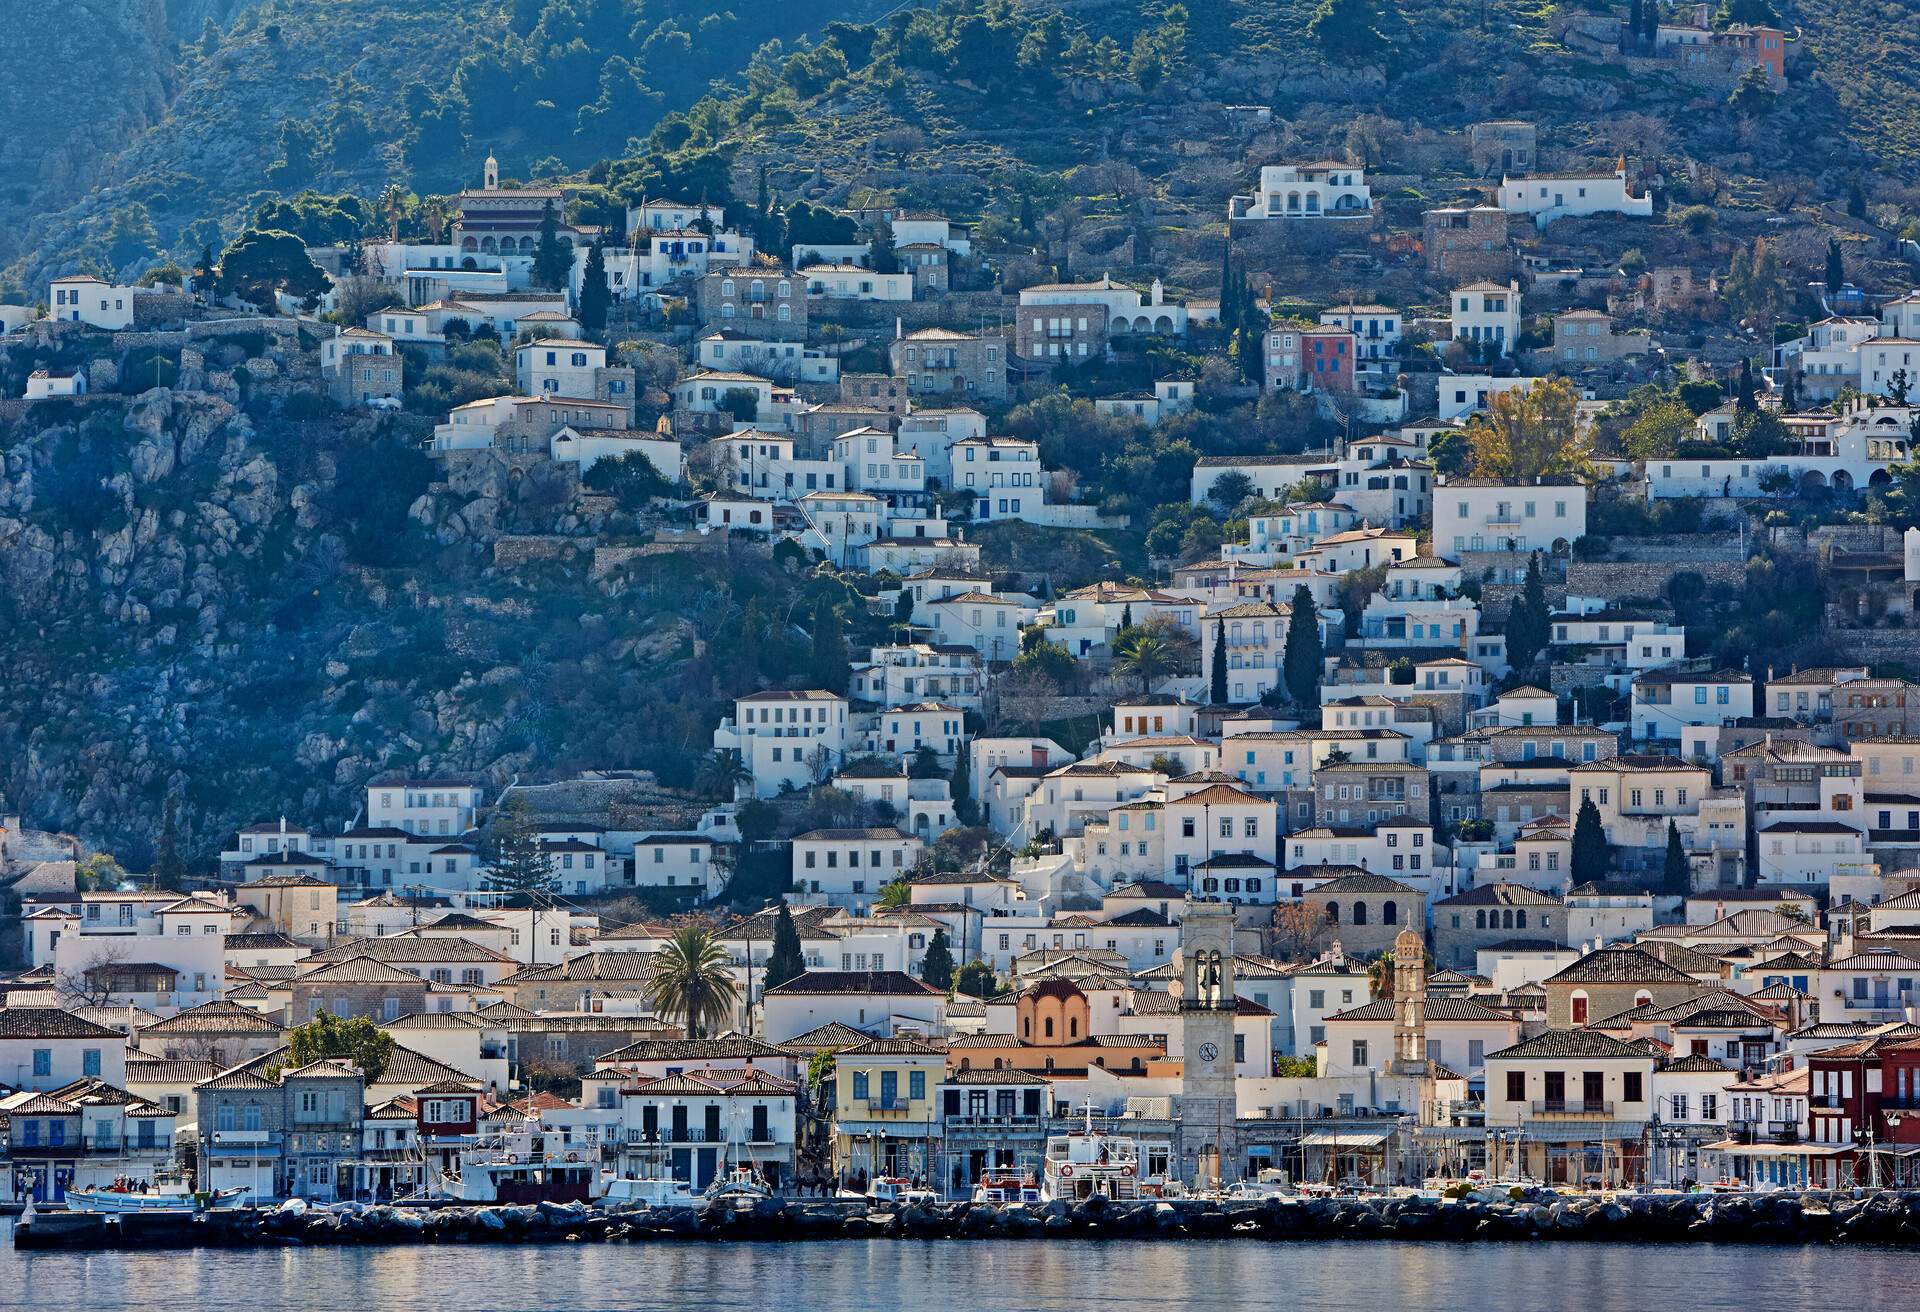 View of traditional Greek houses in the port of Hydra Town on the isle of Hydra, one of the Saronic islands of Greece.